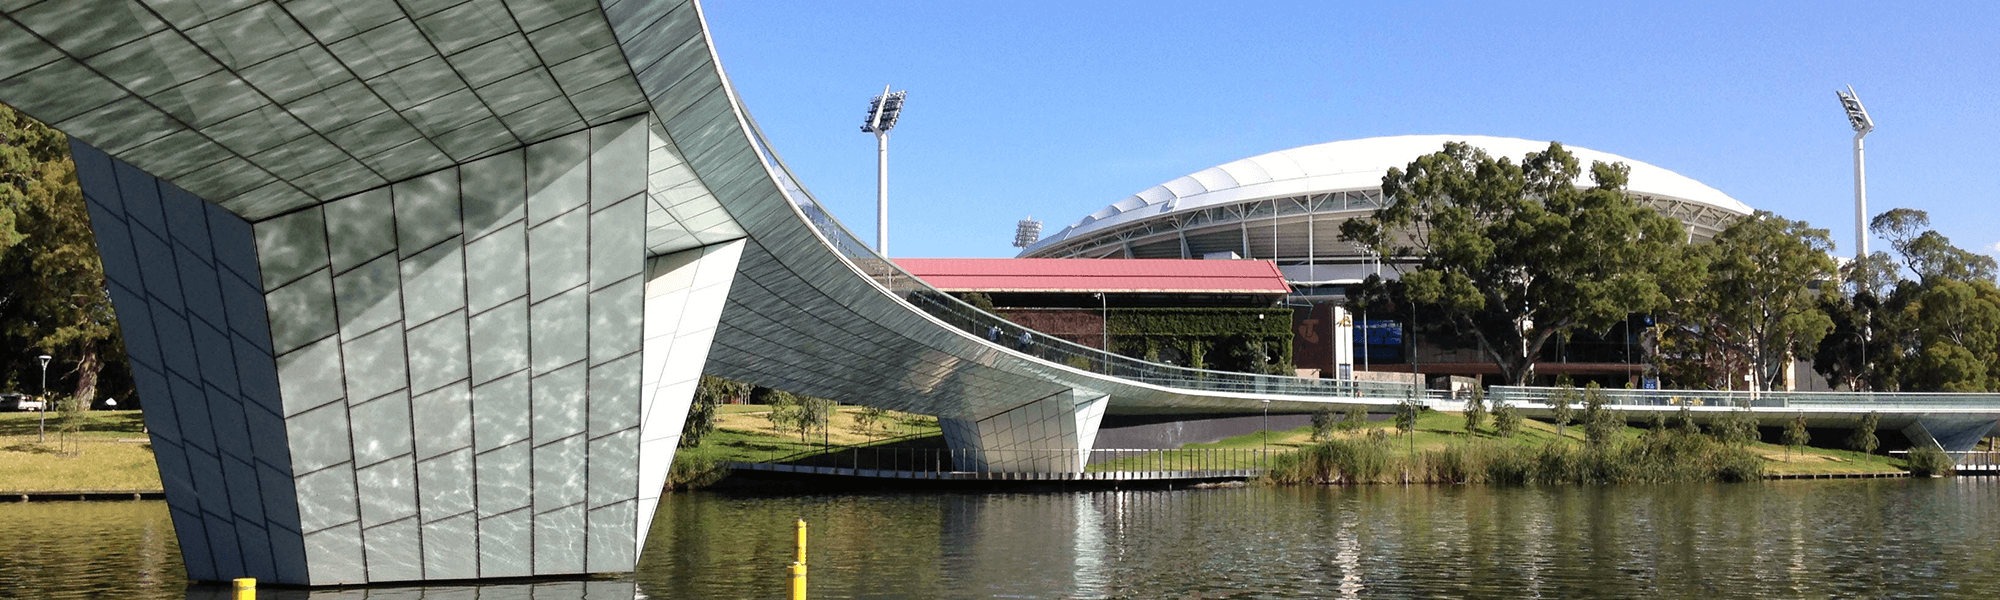 Adelaide river and sporting arena